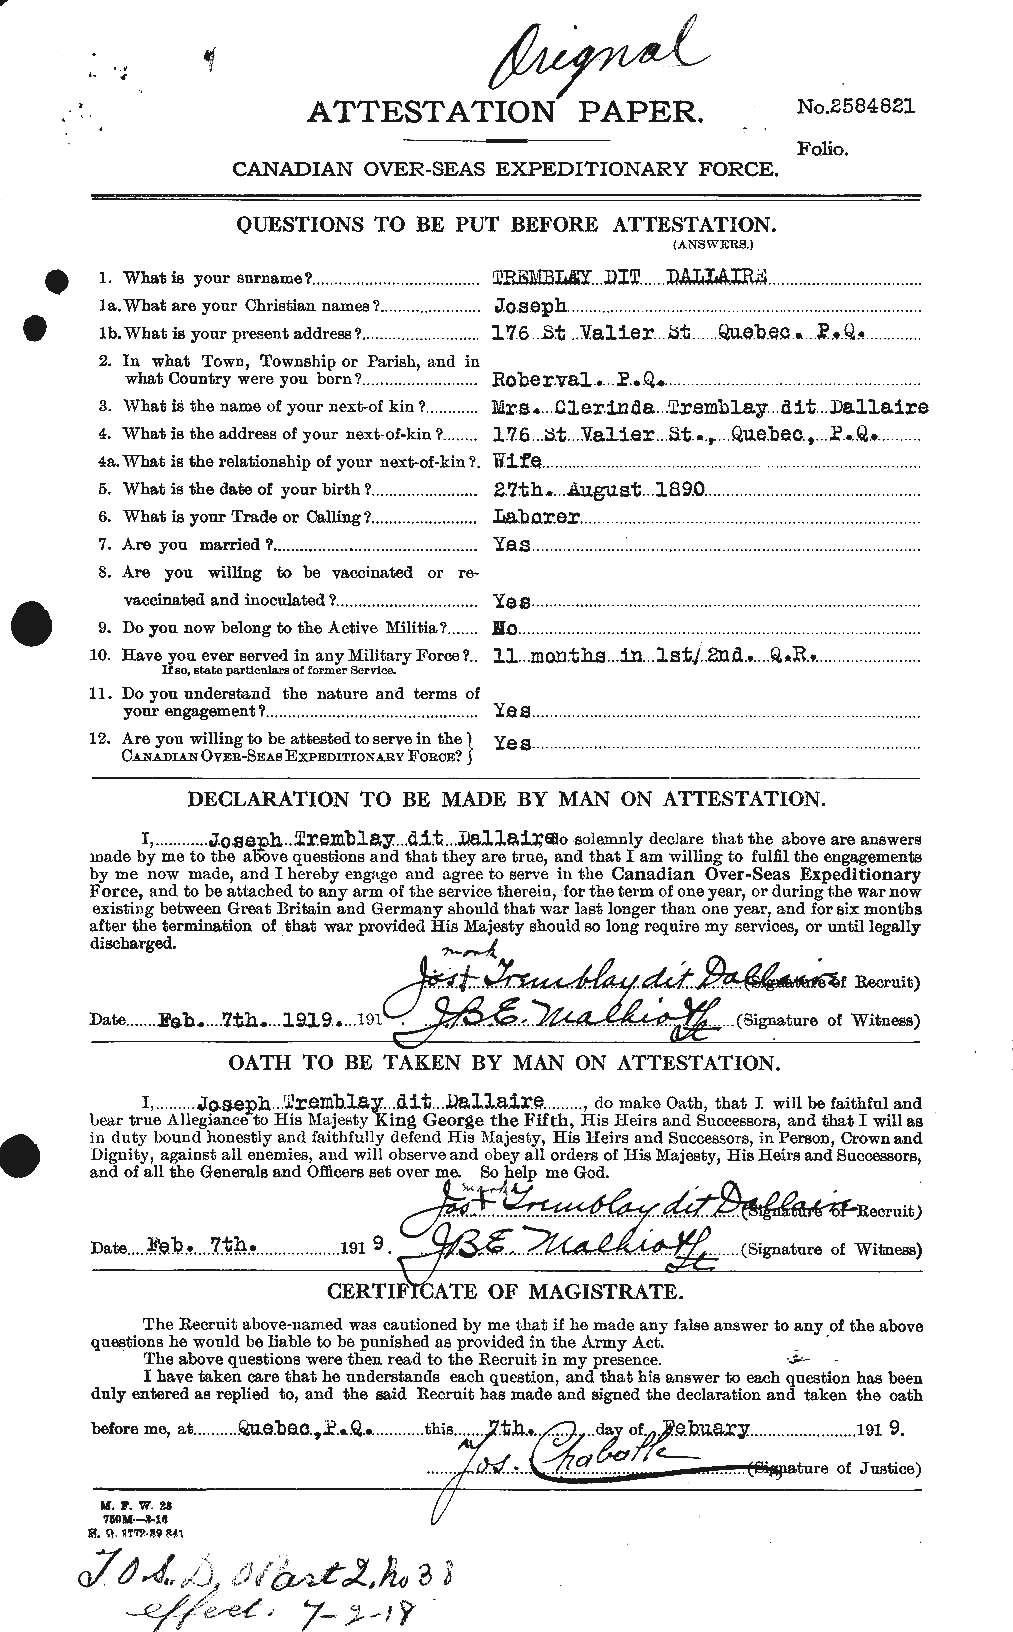 Personnel Records of the First World War - CEF 639136a